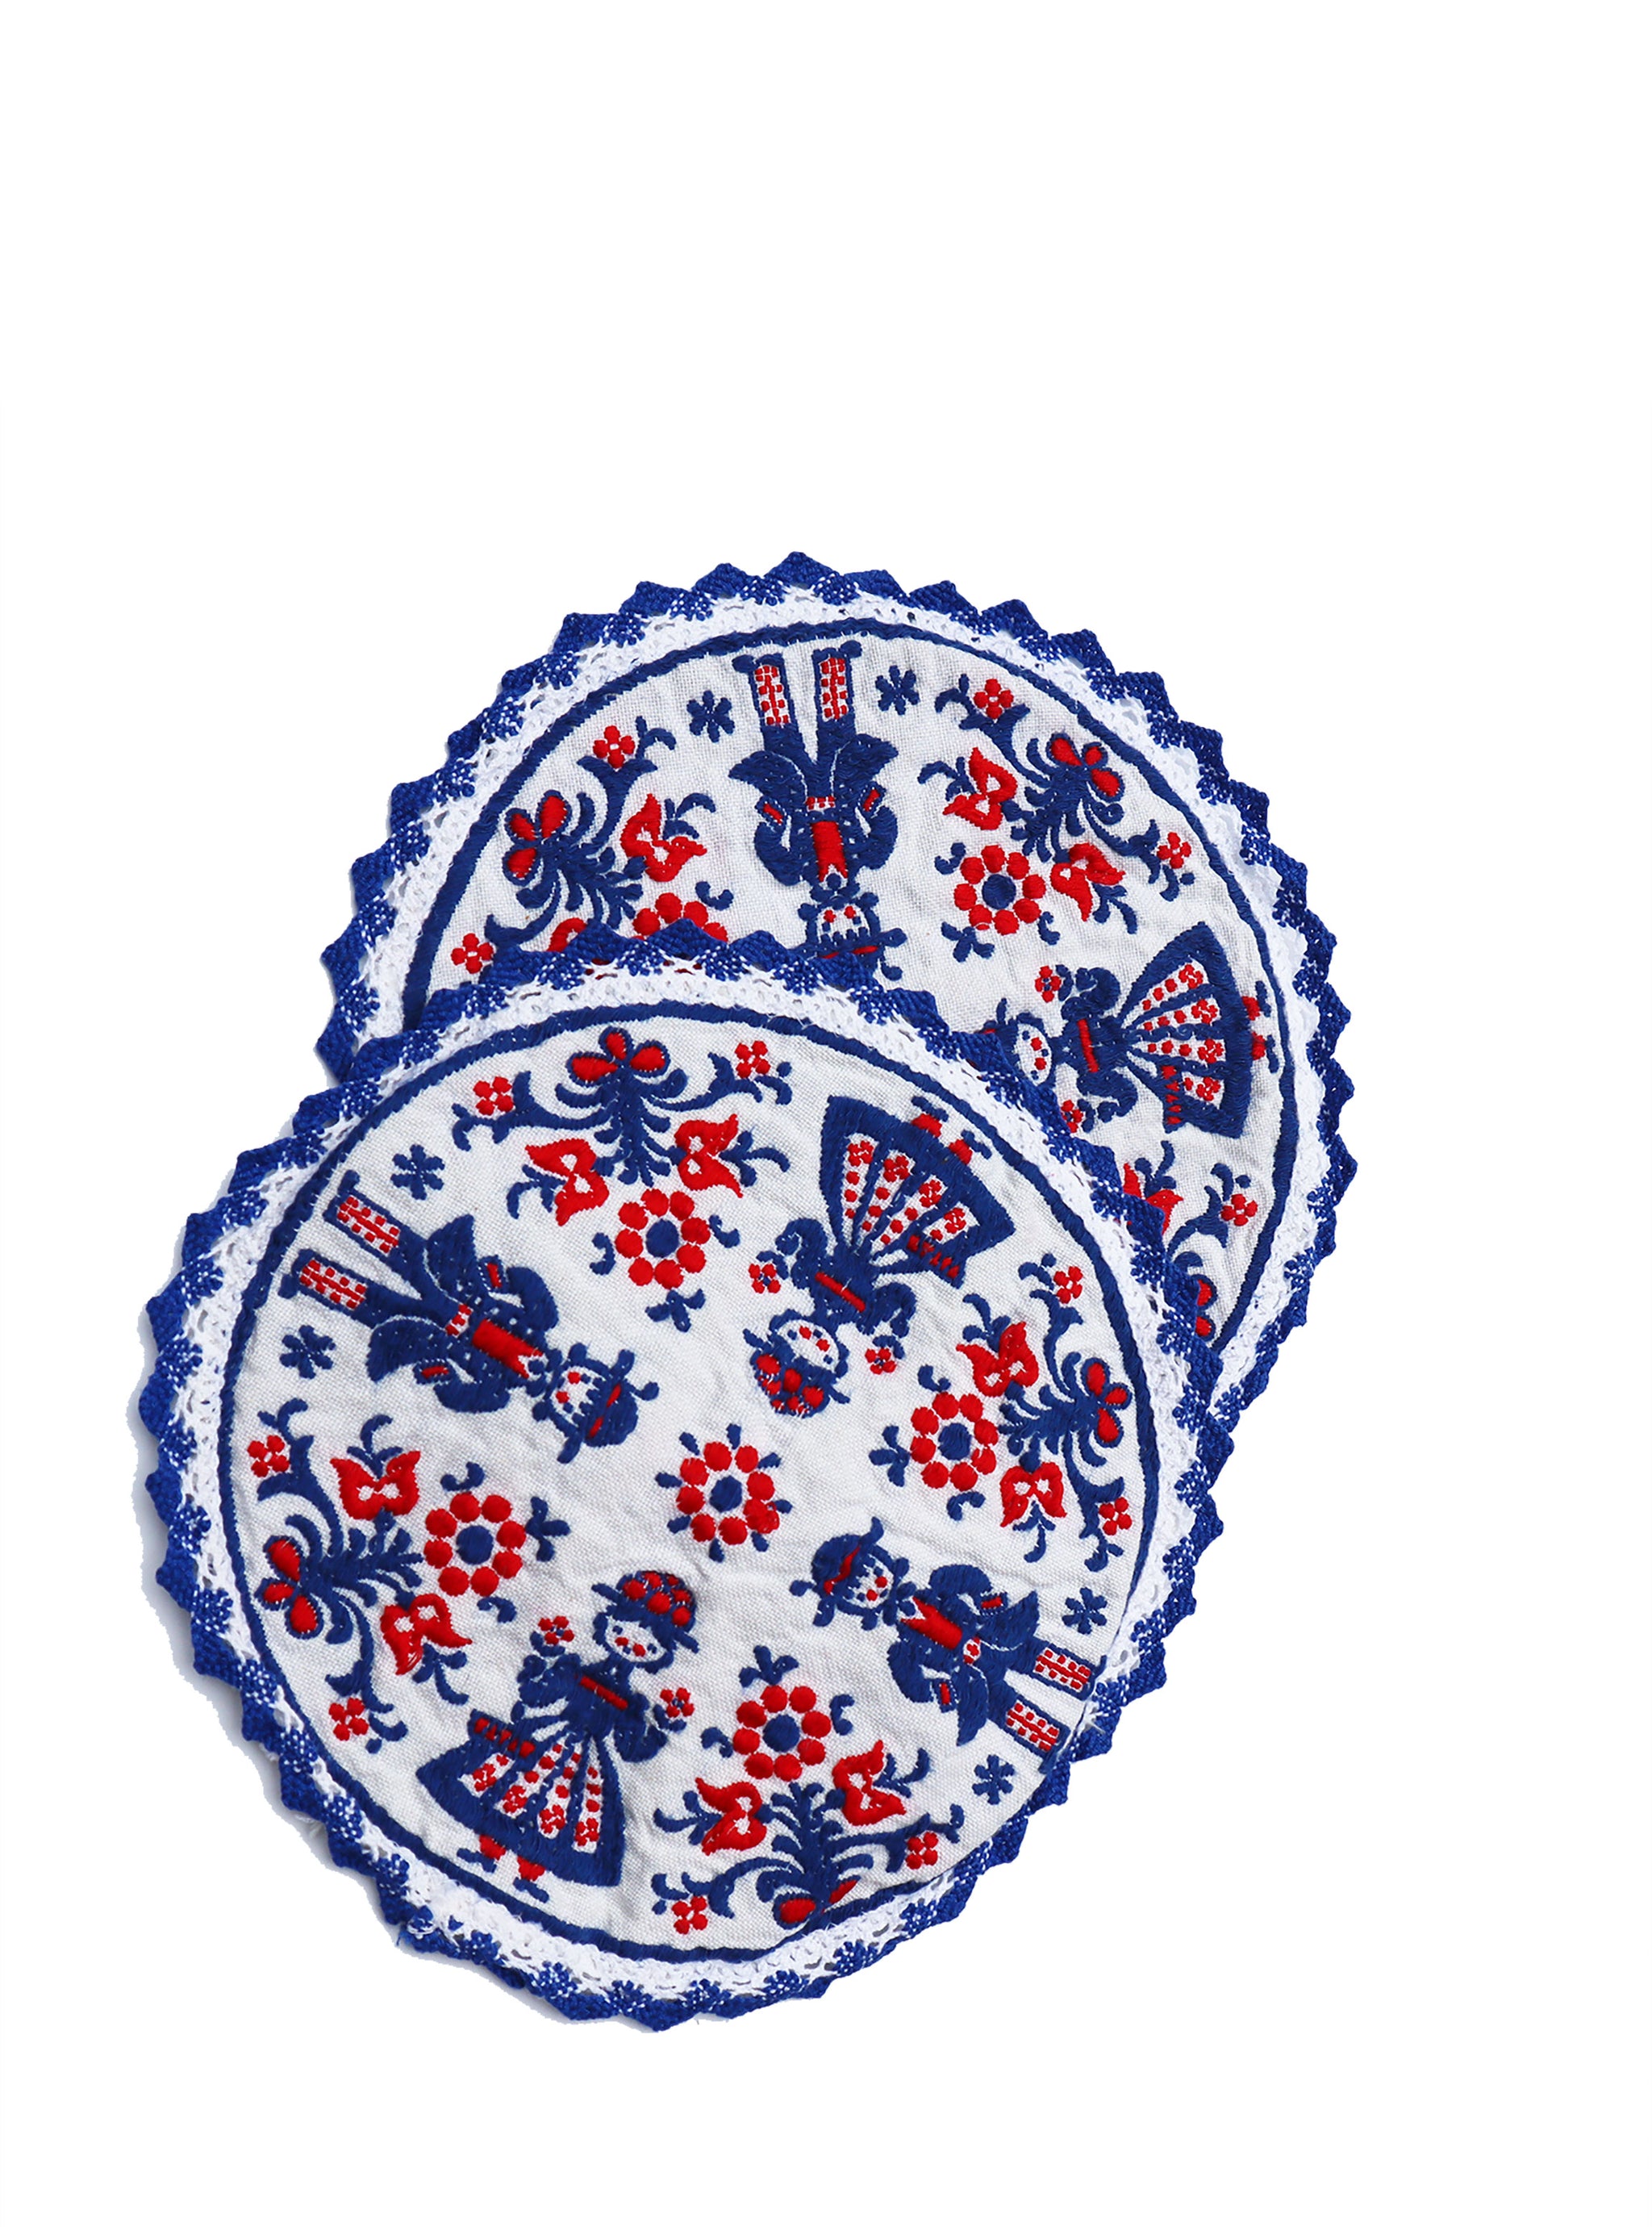 Vintage Scandinavian Embroidered Coasters/Doilies (Set of 2)